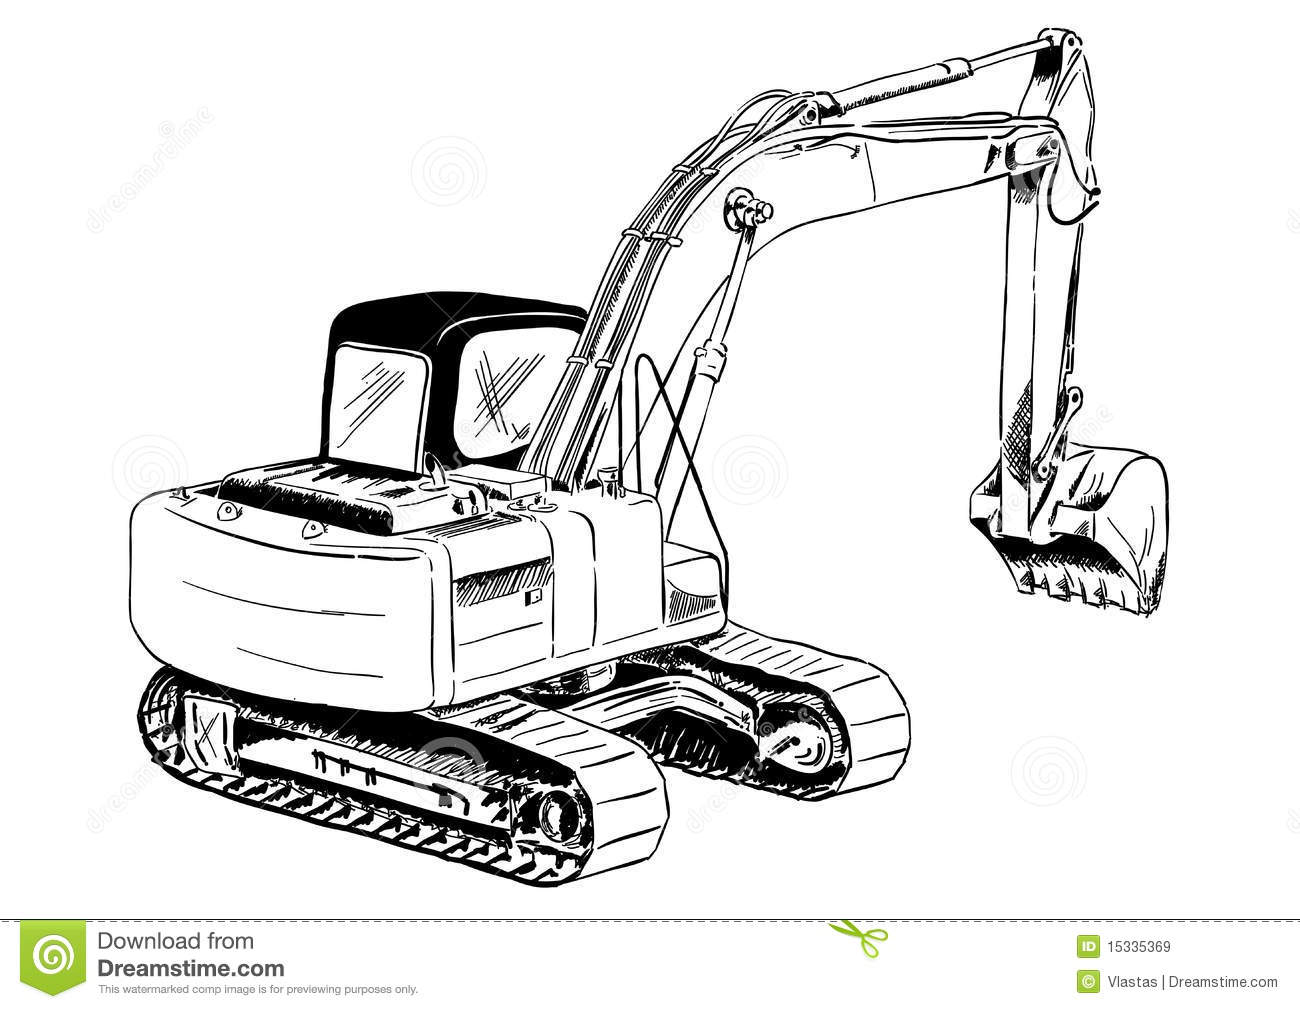 Excavator Royalty Free Stock Images   Image  15335369